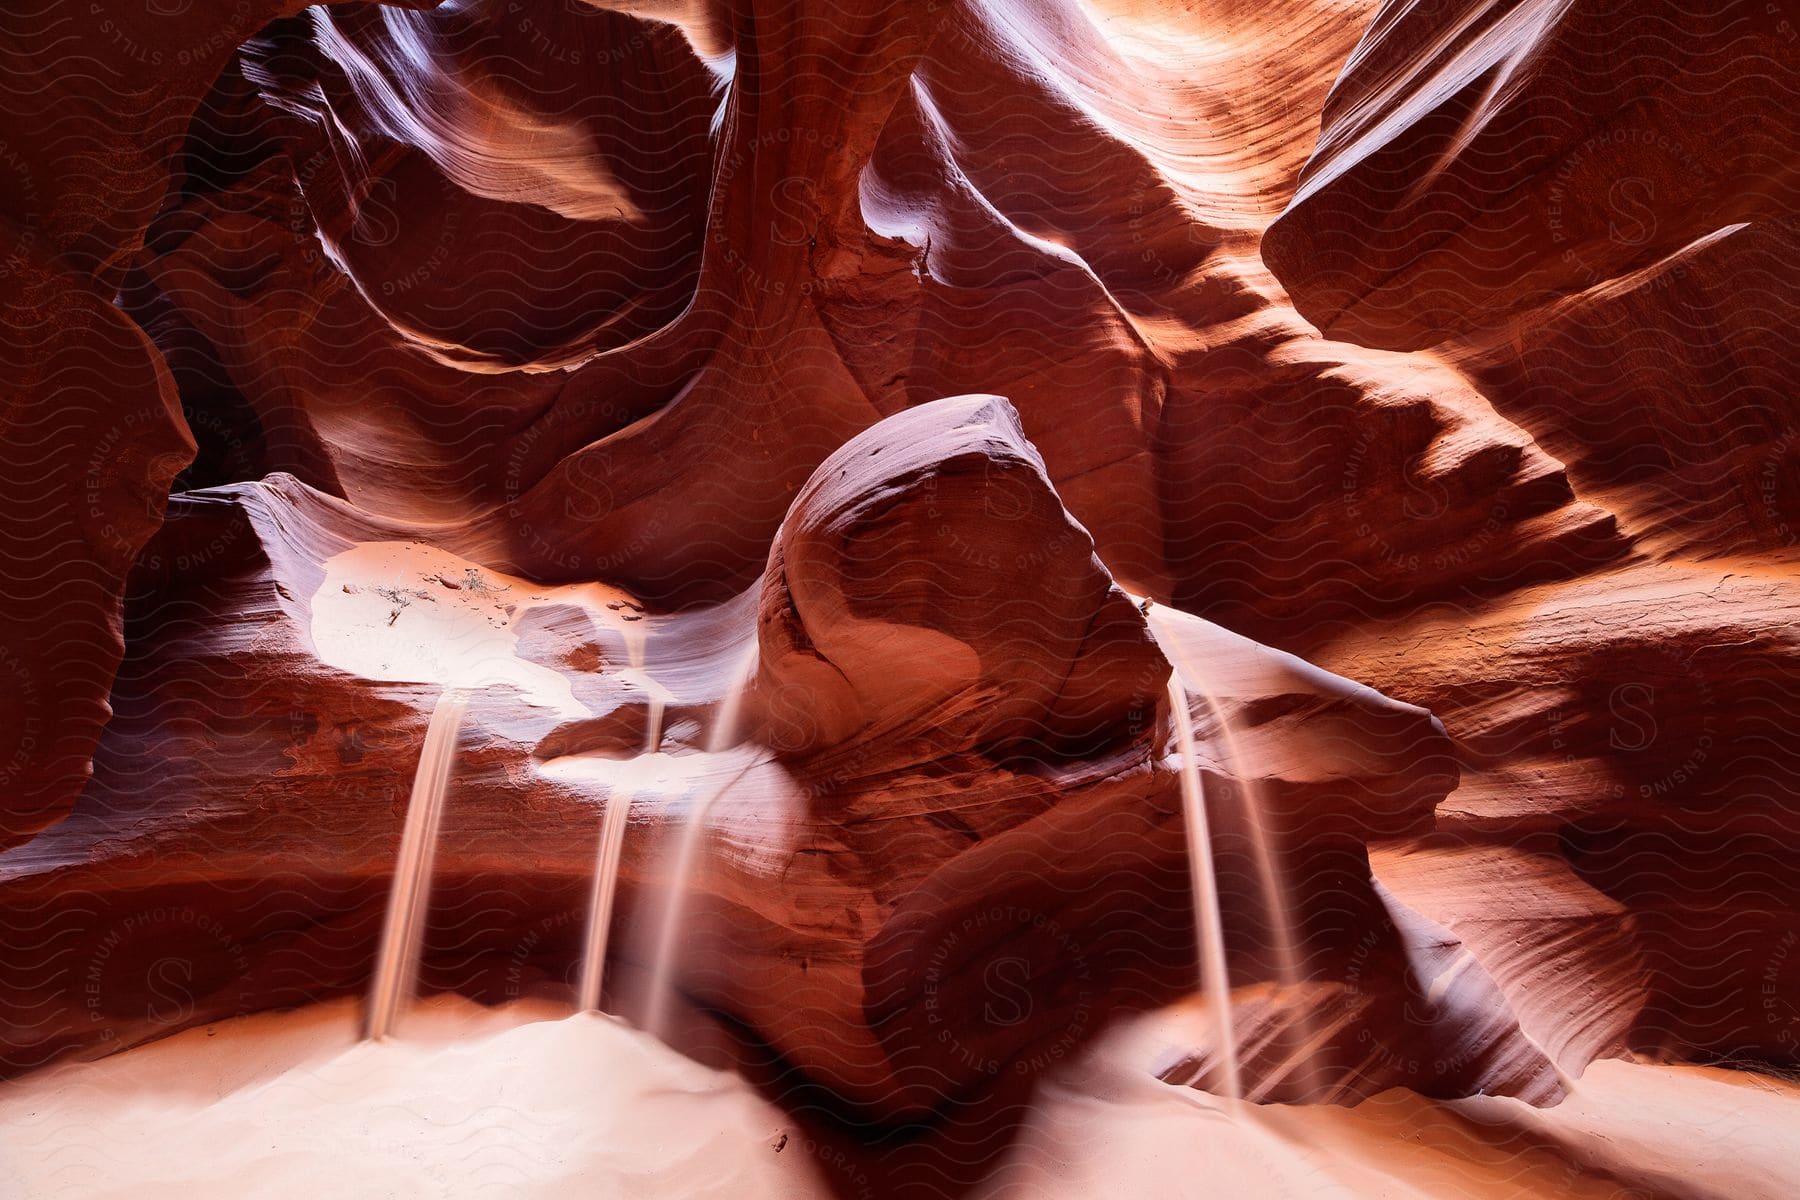 Rock formation resembling a nose in antelope canyon